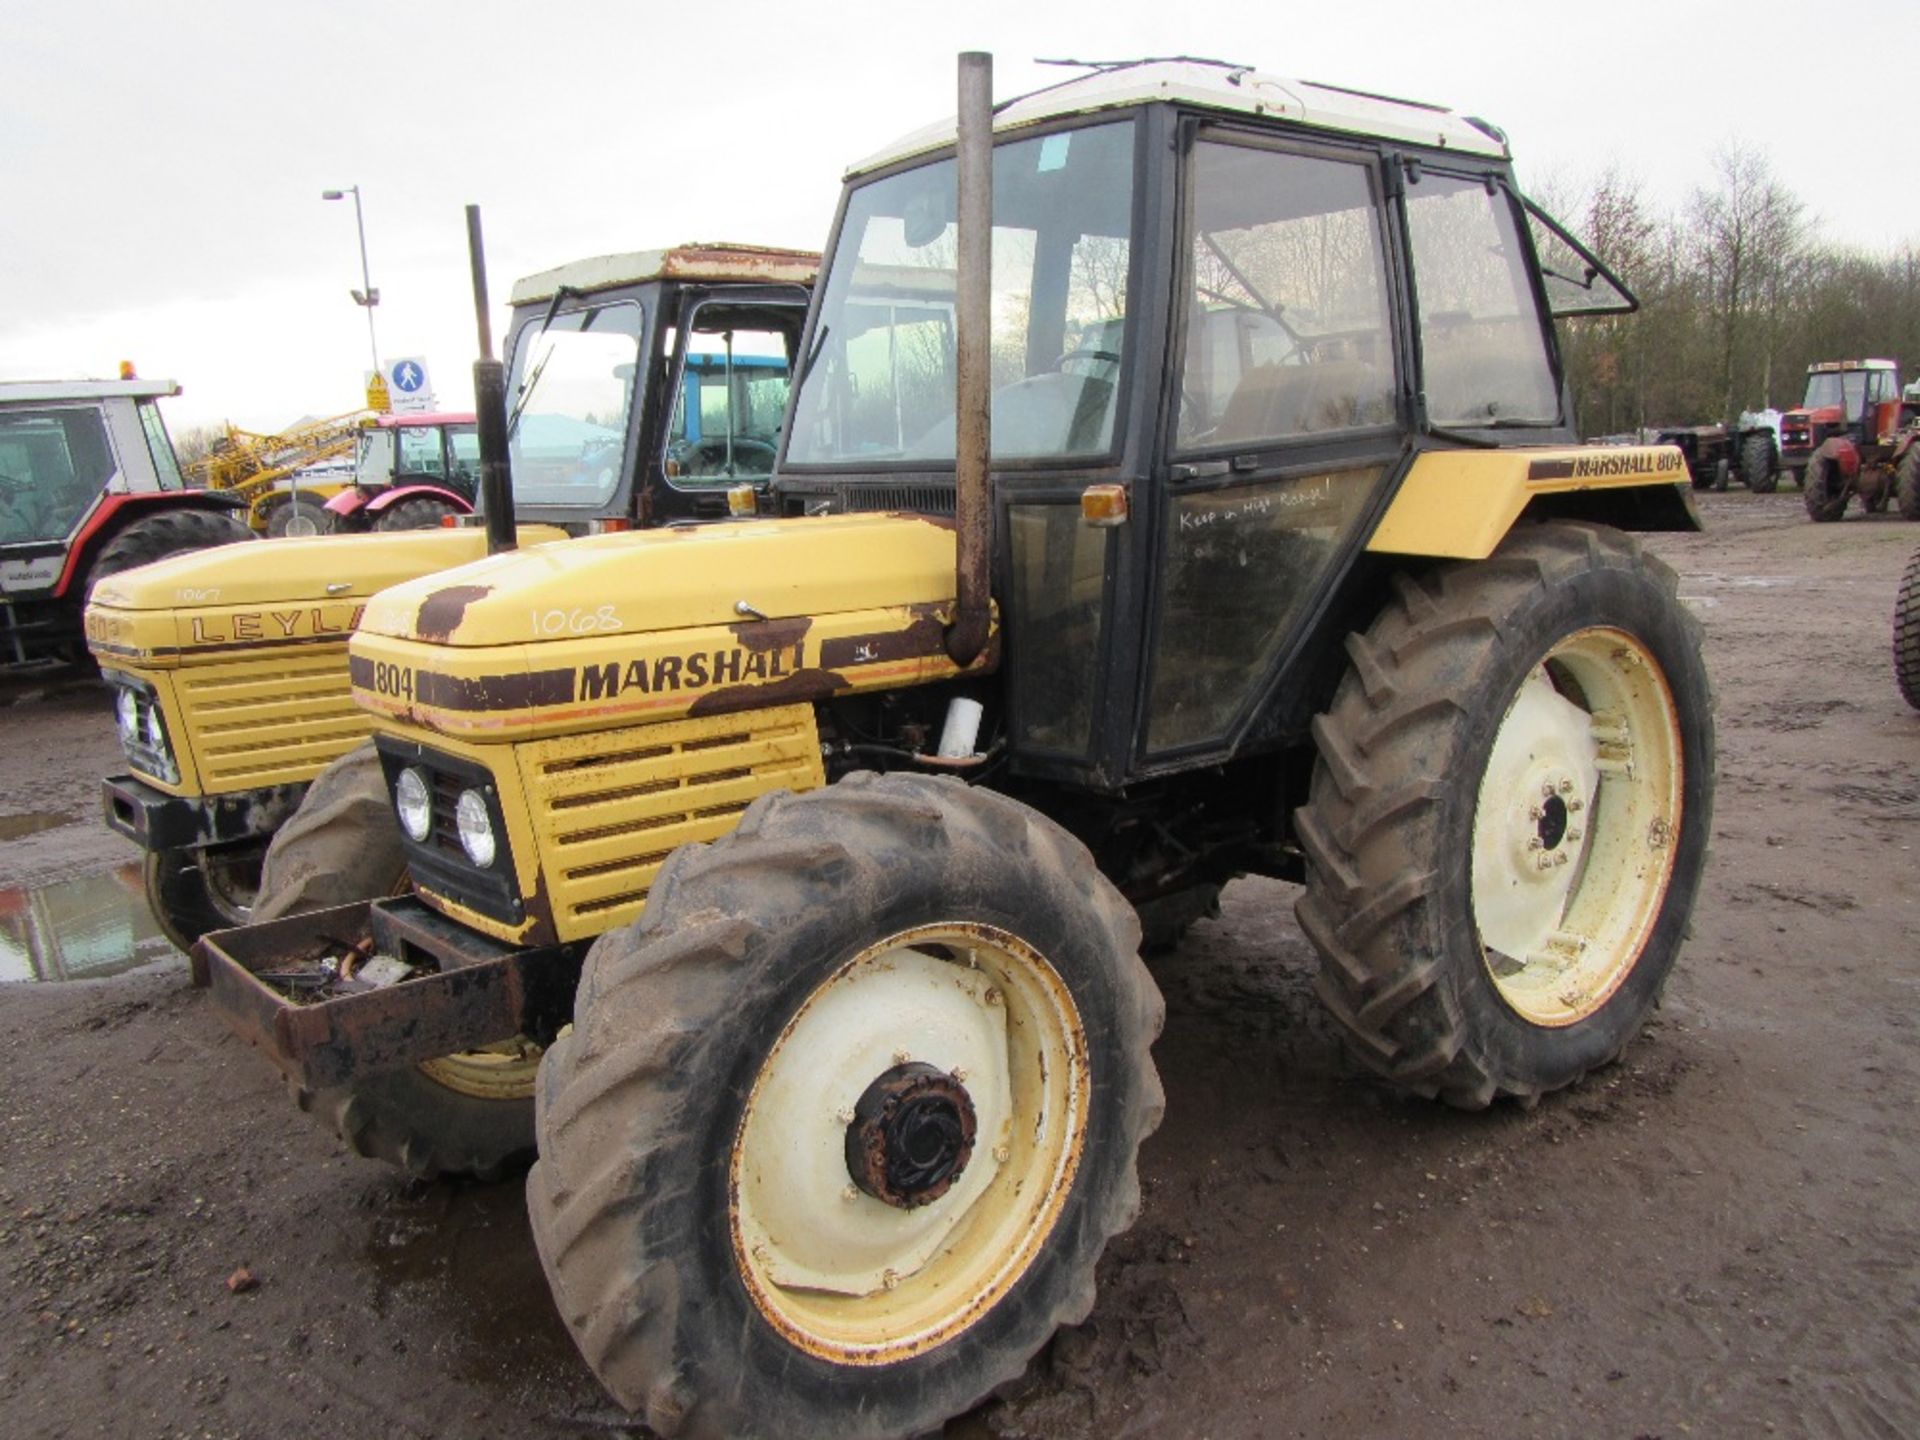 Marshall 804 4wd Tractor